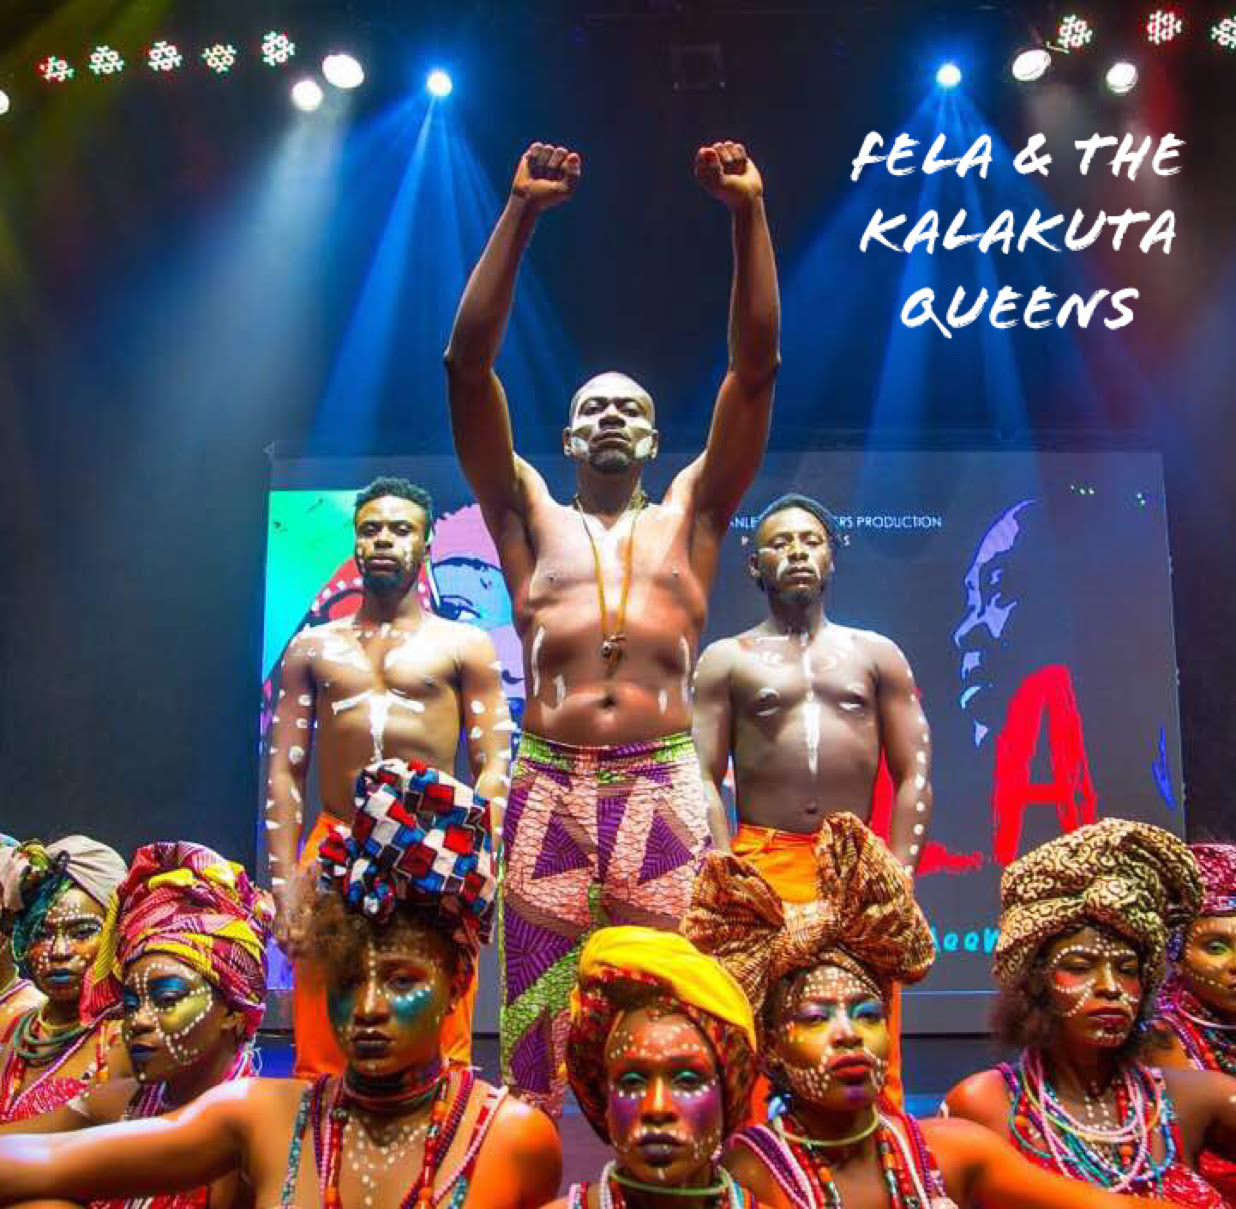 Get Excited and Ready Fela & The Kalakuta Queens Live at Terra Dec. ‘17 -Jan. ‘18